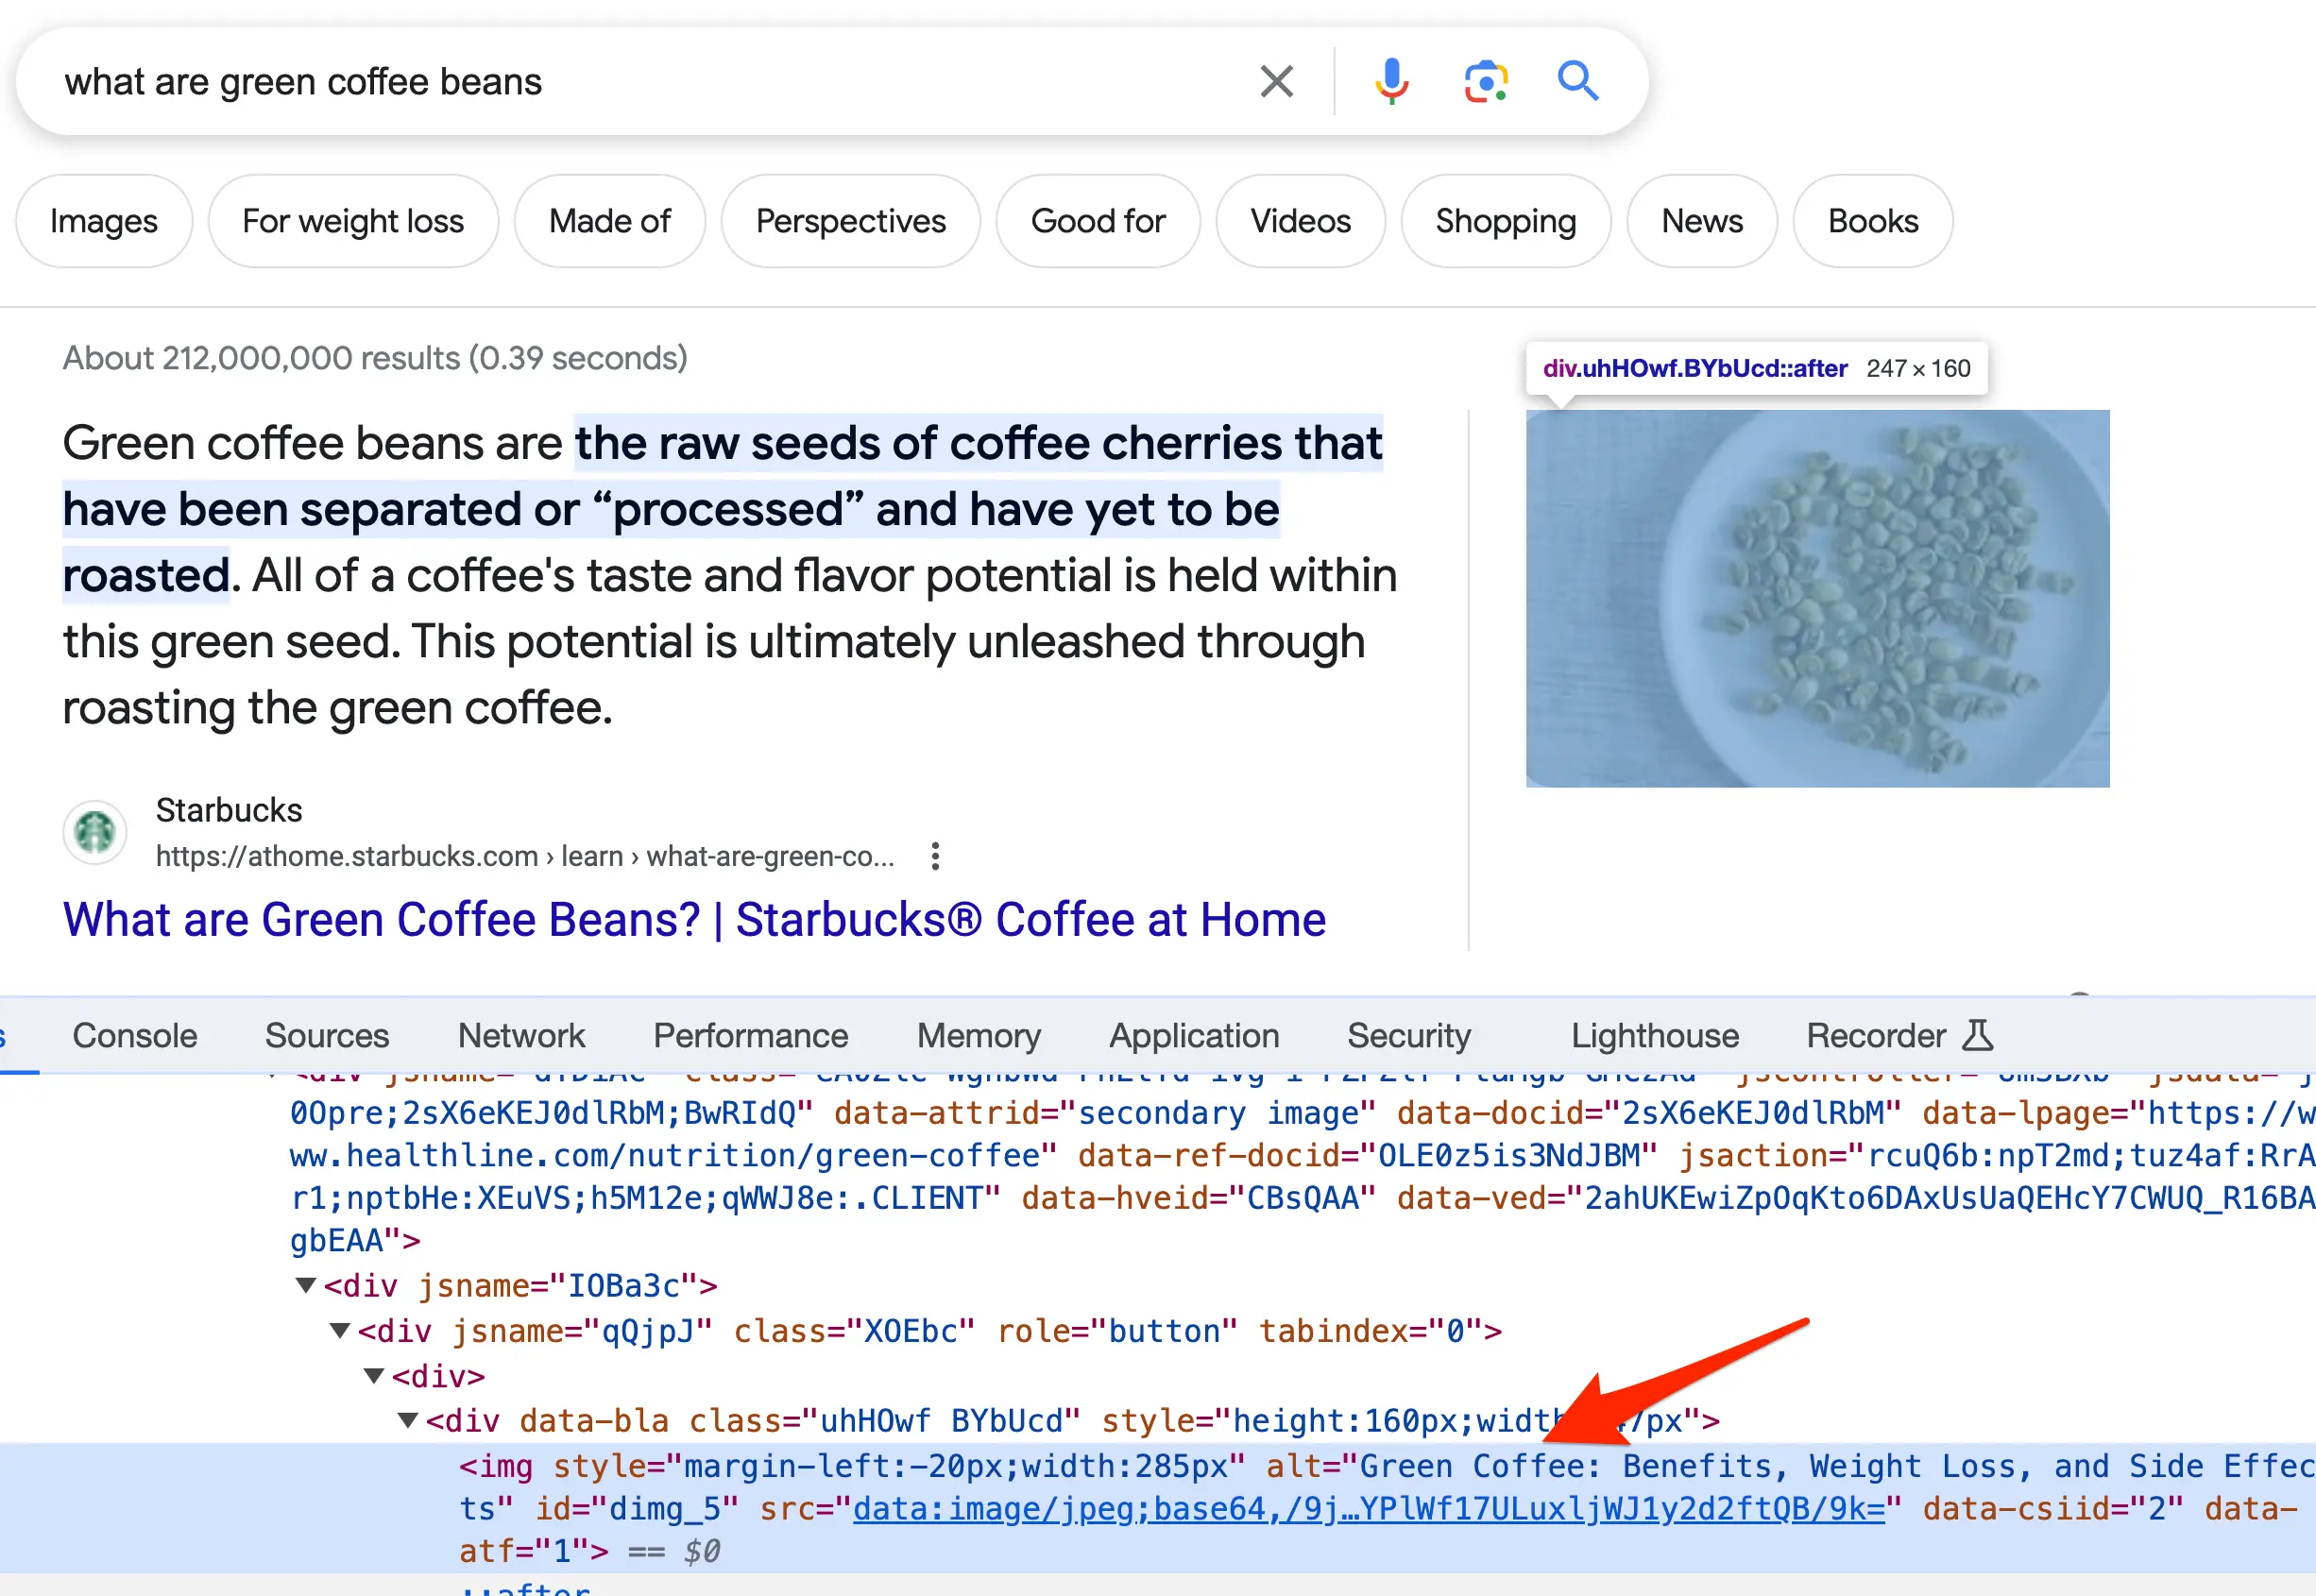 Featured Snippets - Images